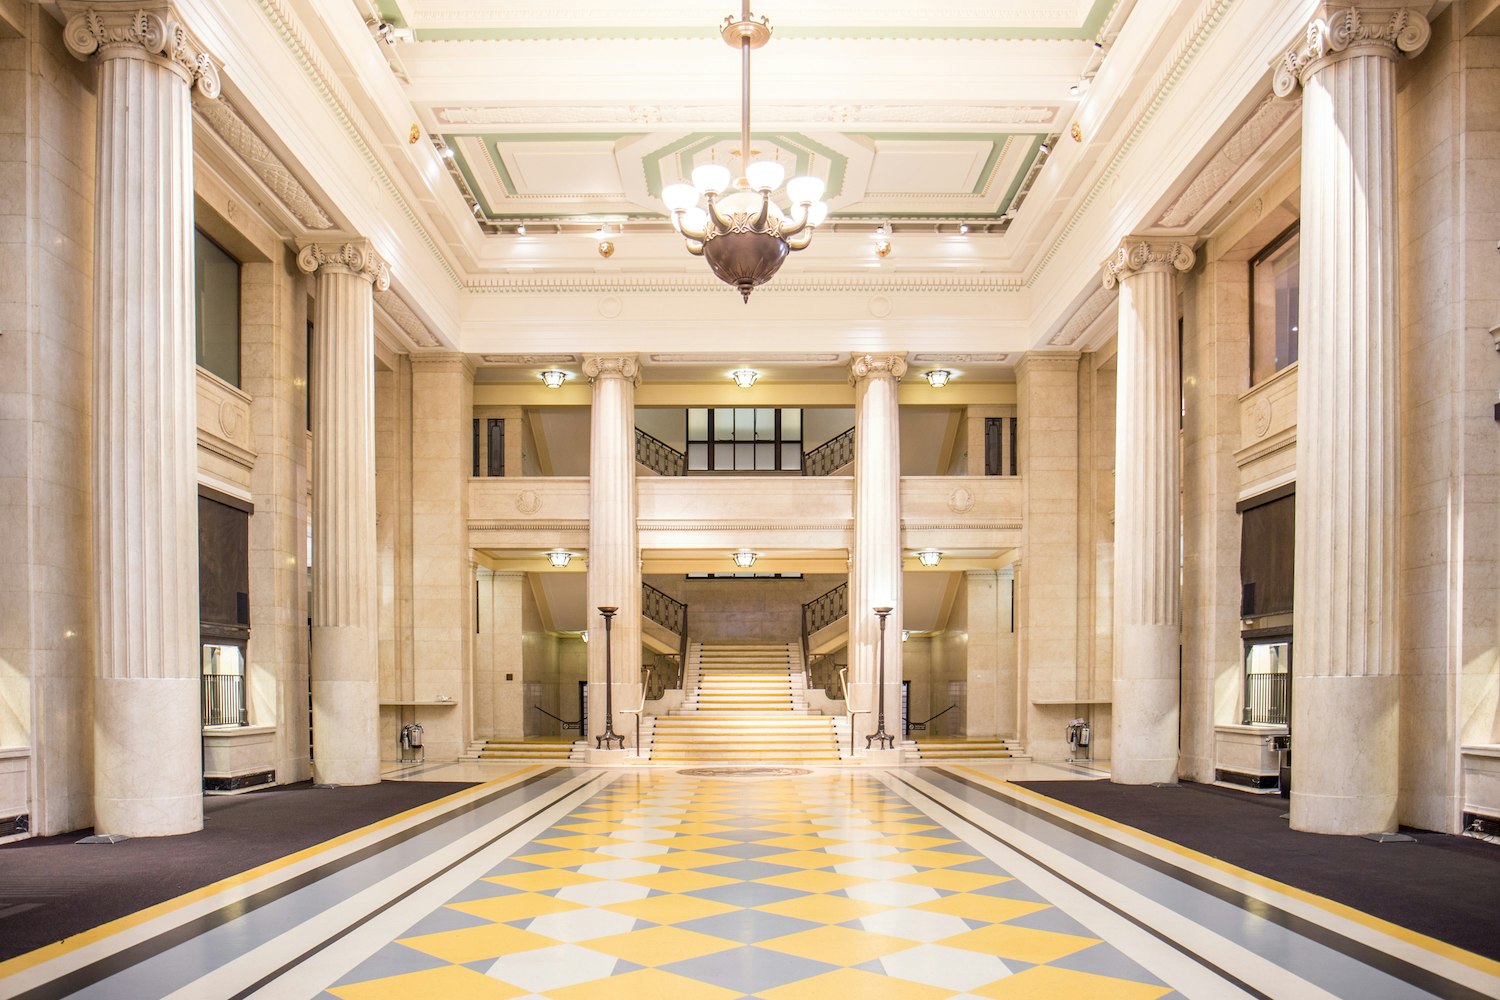 Work Party Venues in London - The Banking Hall